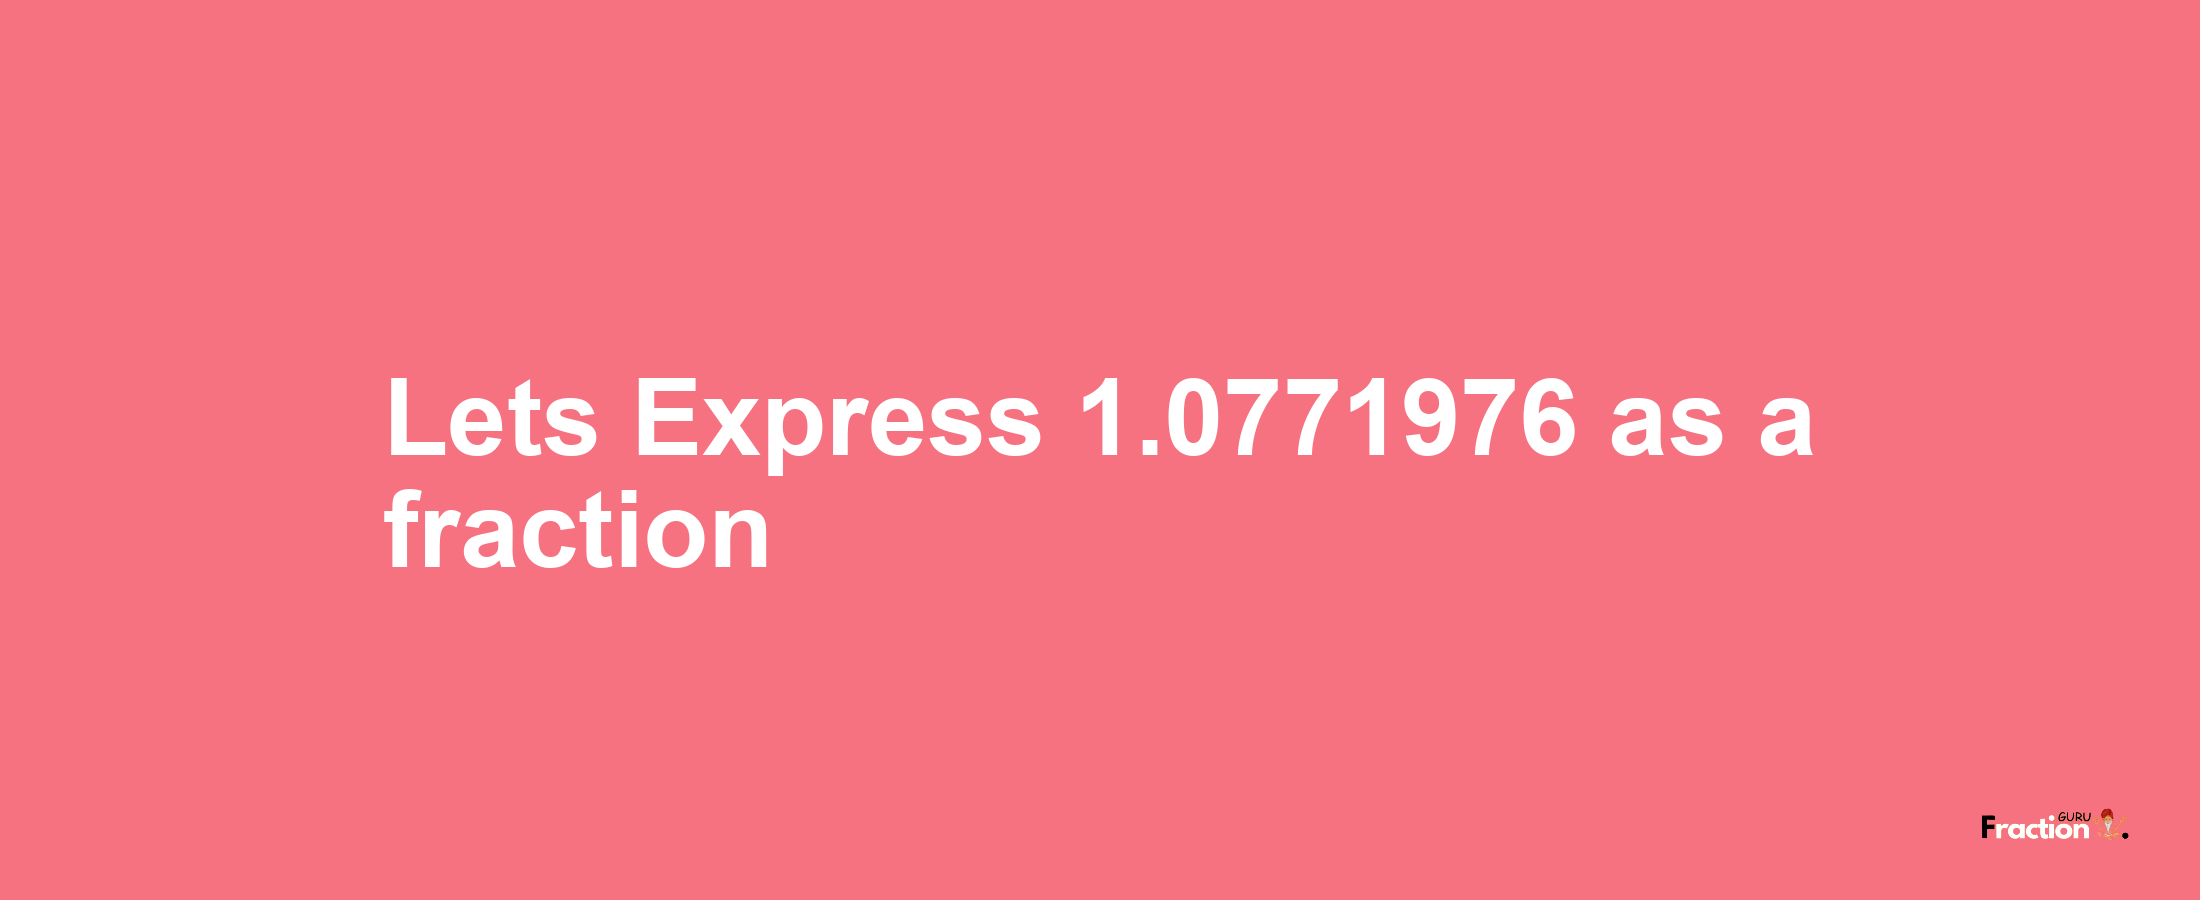 Lets Express 1.0771976 as afraction